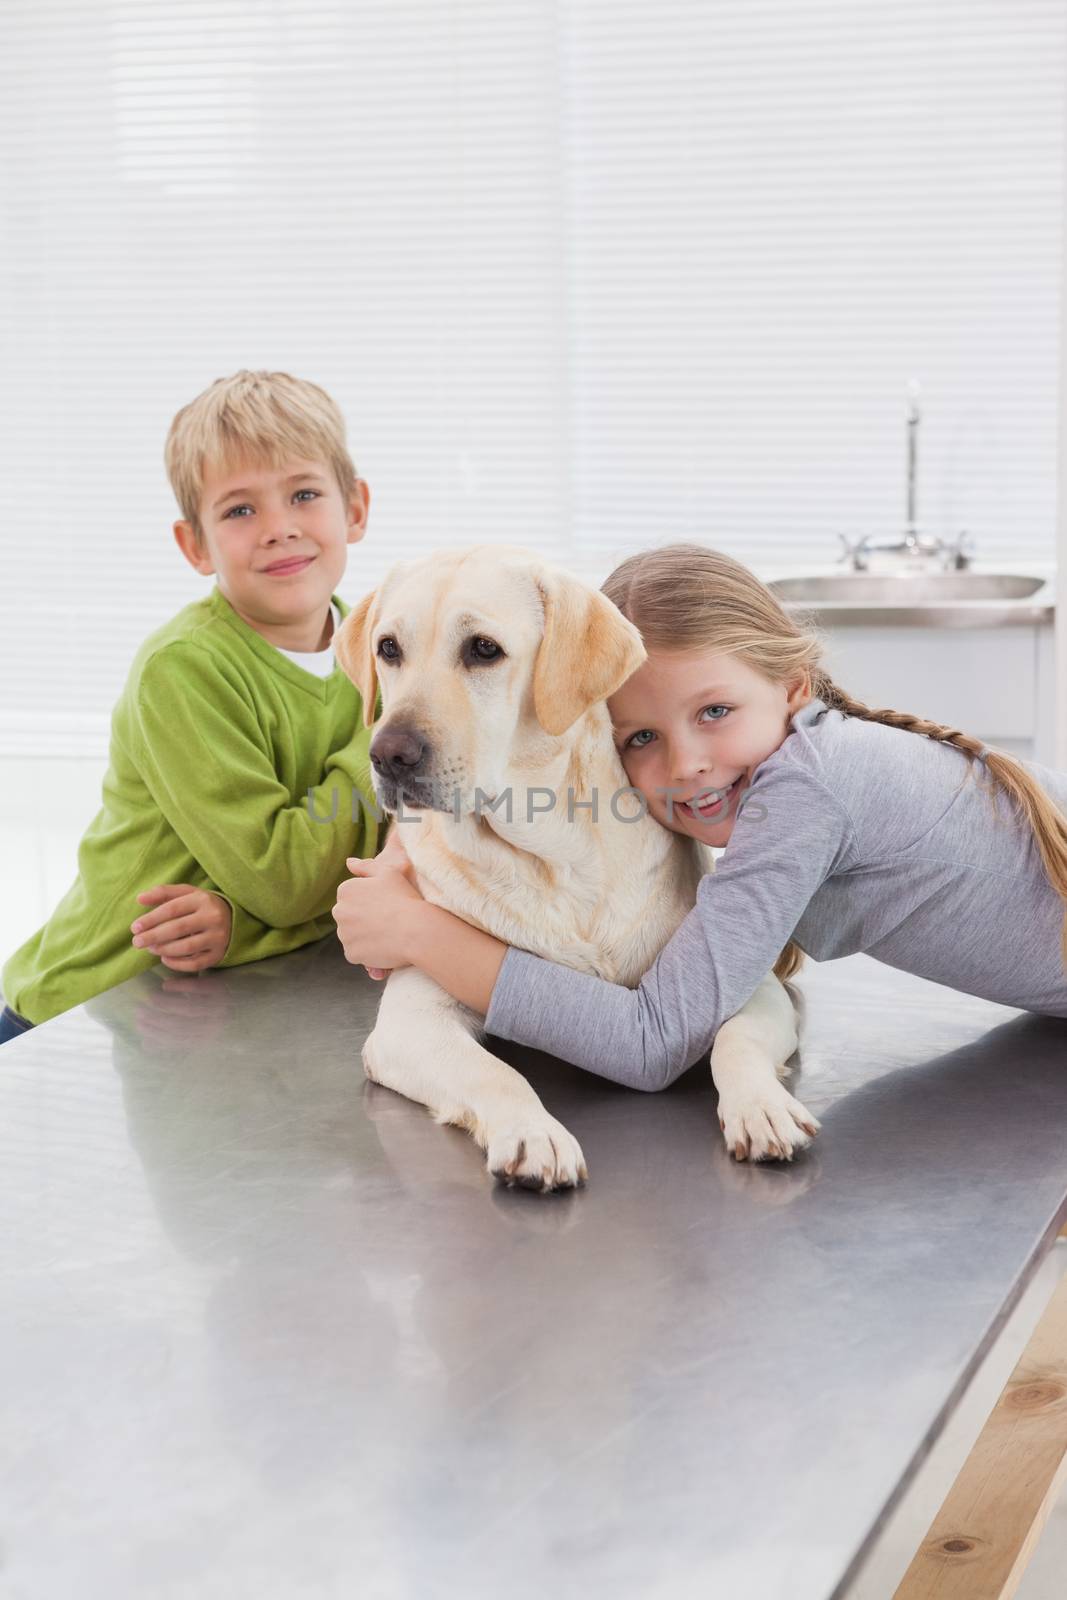 Cute labrador with its cheerful owners